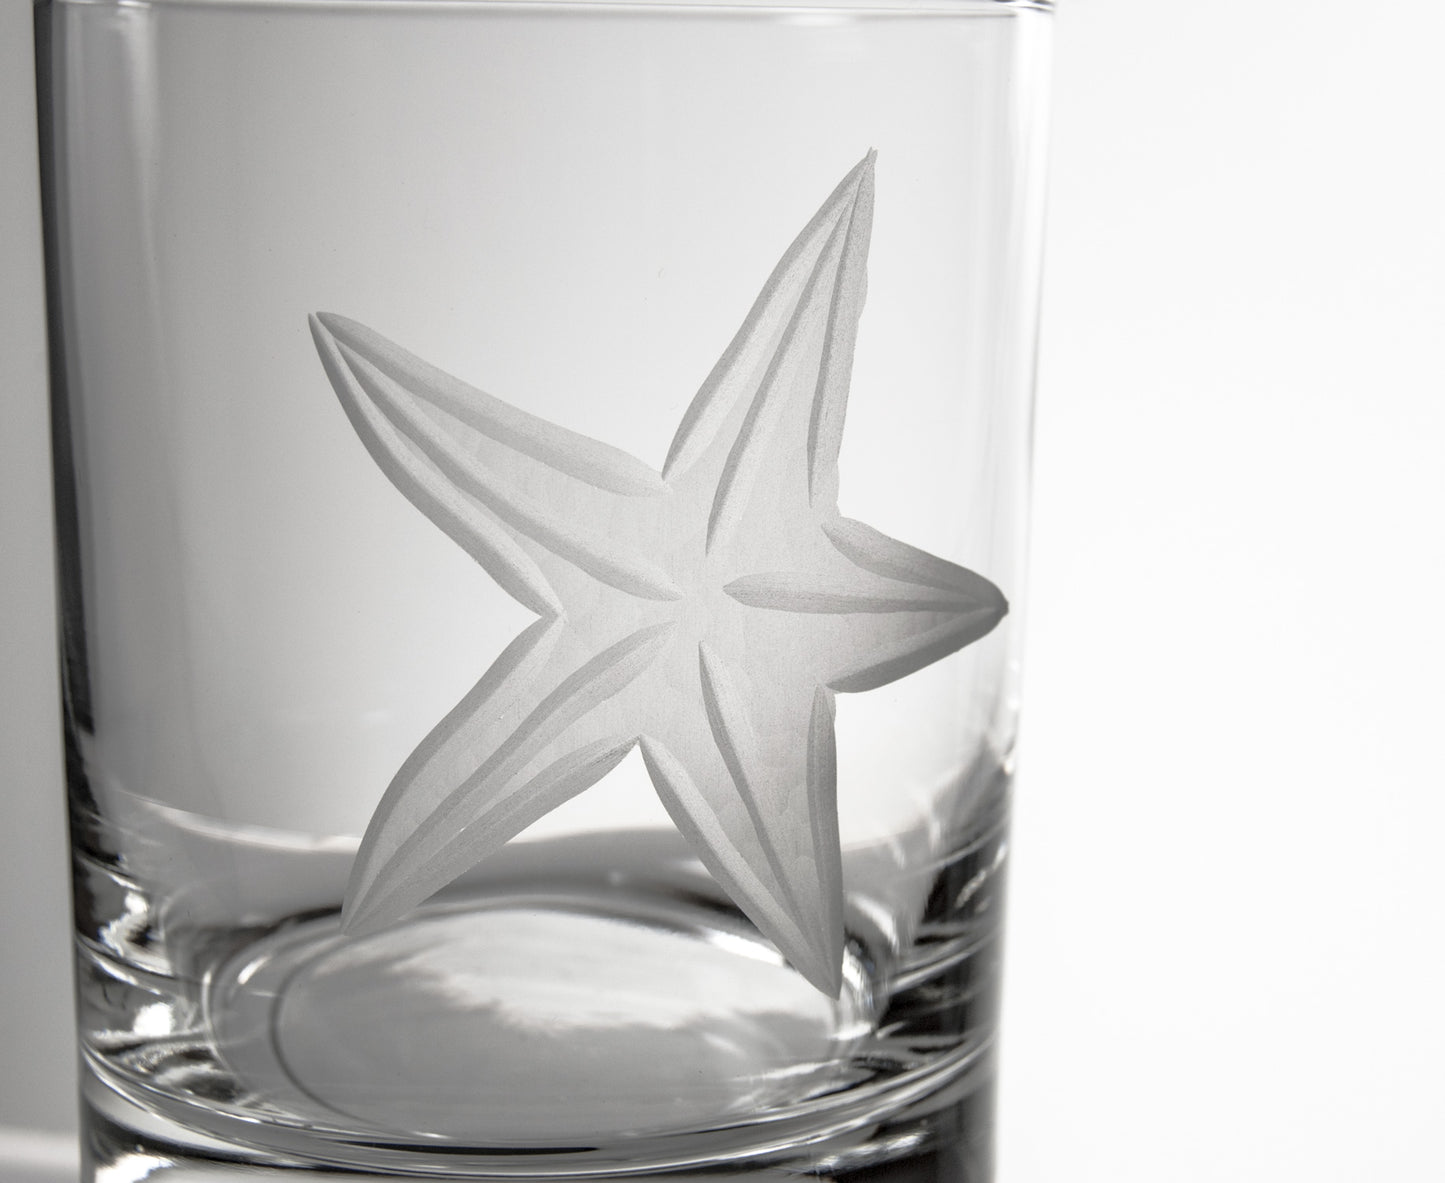 Starfish Double Old Fashioned 14oz | Set of 4 Glasses